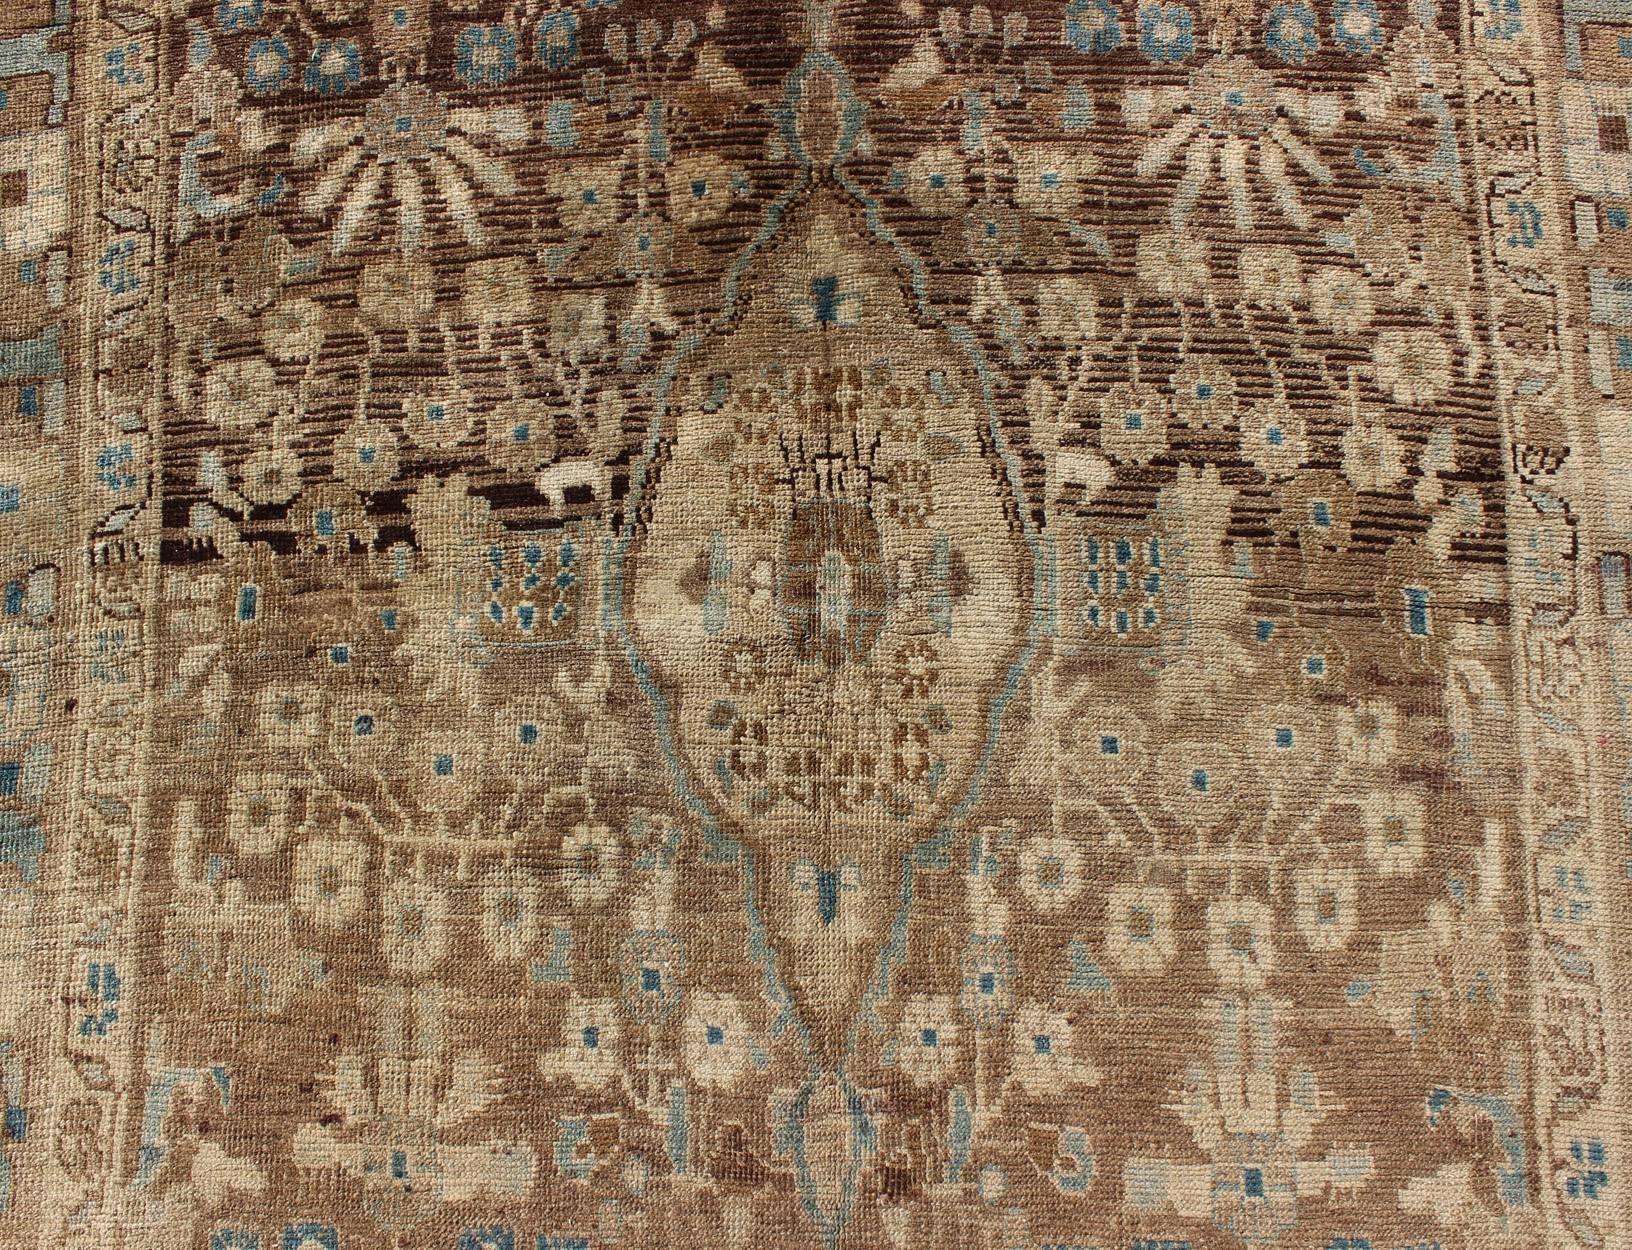 20th Century Persian Mahal Rug with Brown and Blue